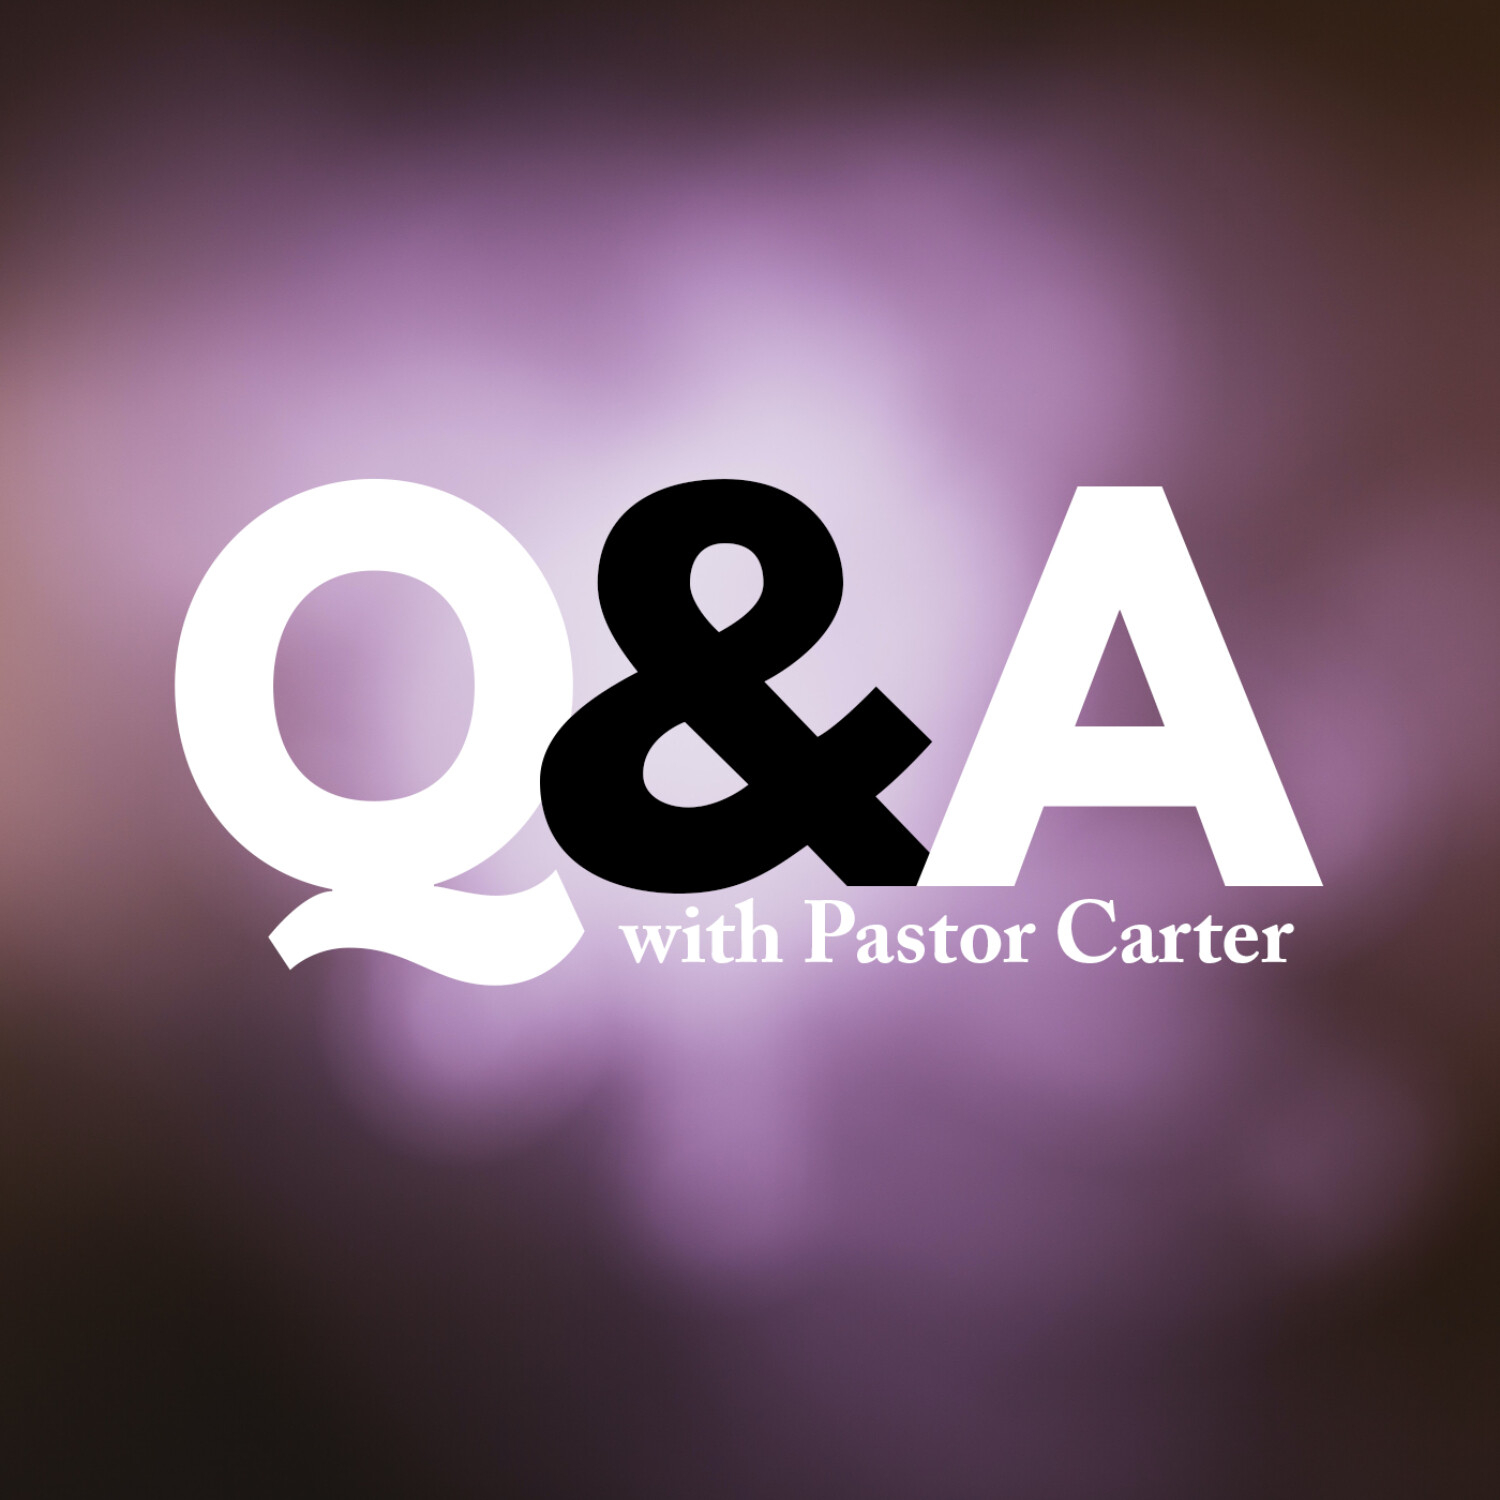 Questions and Answers with Pastor Carter